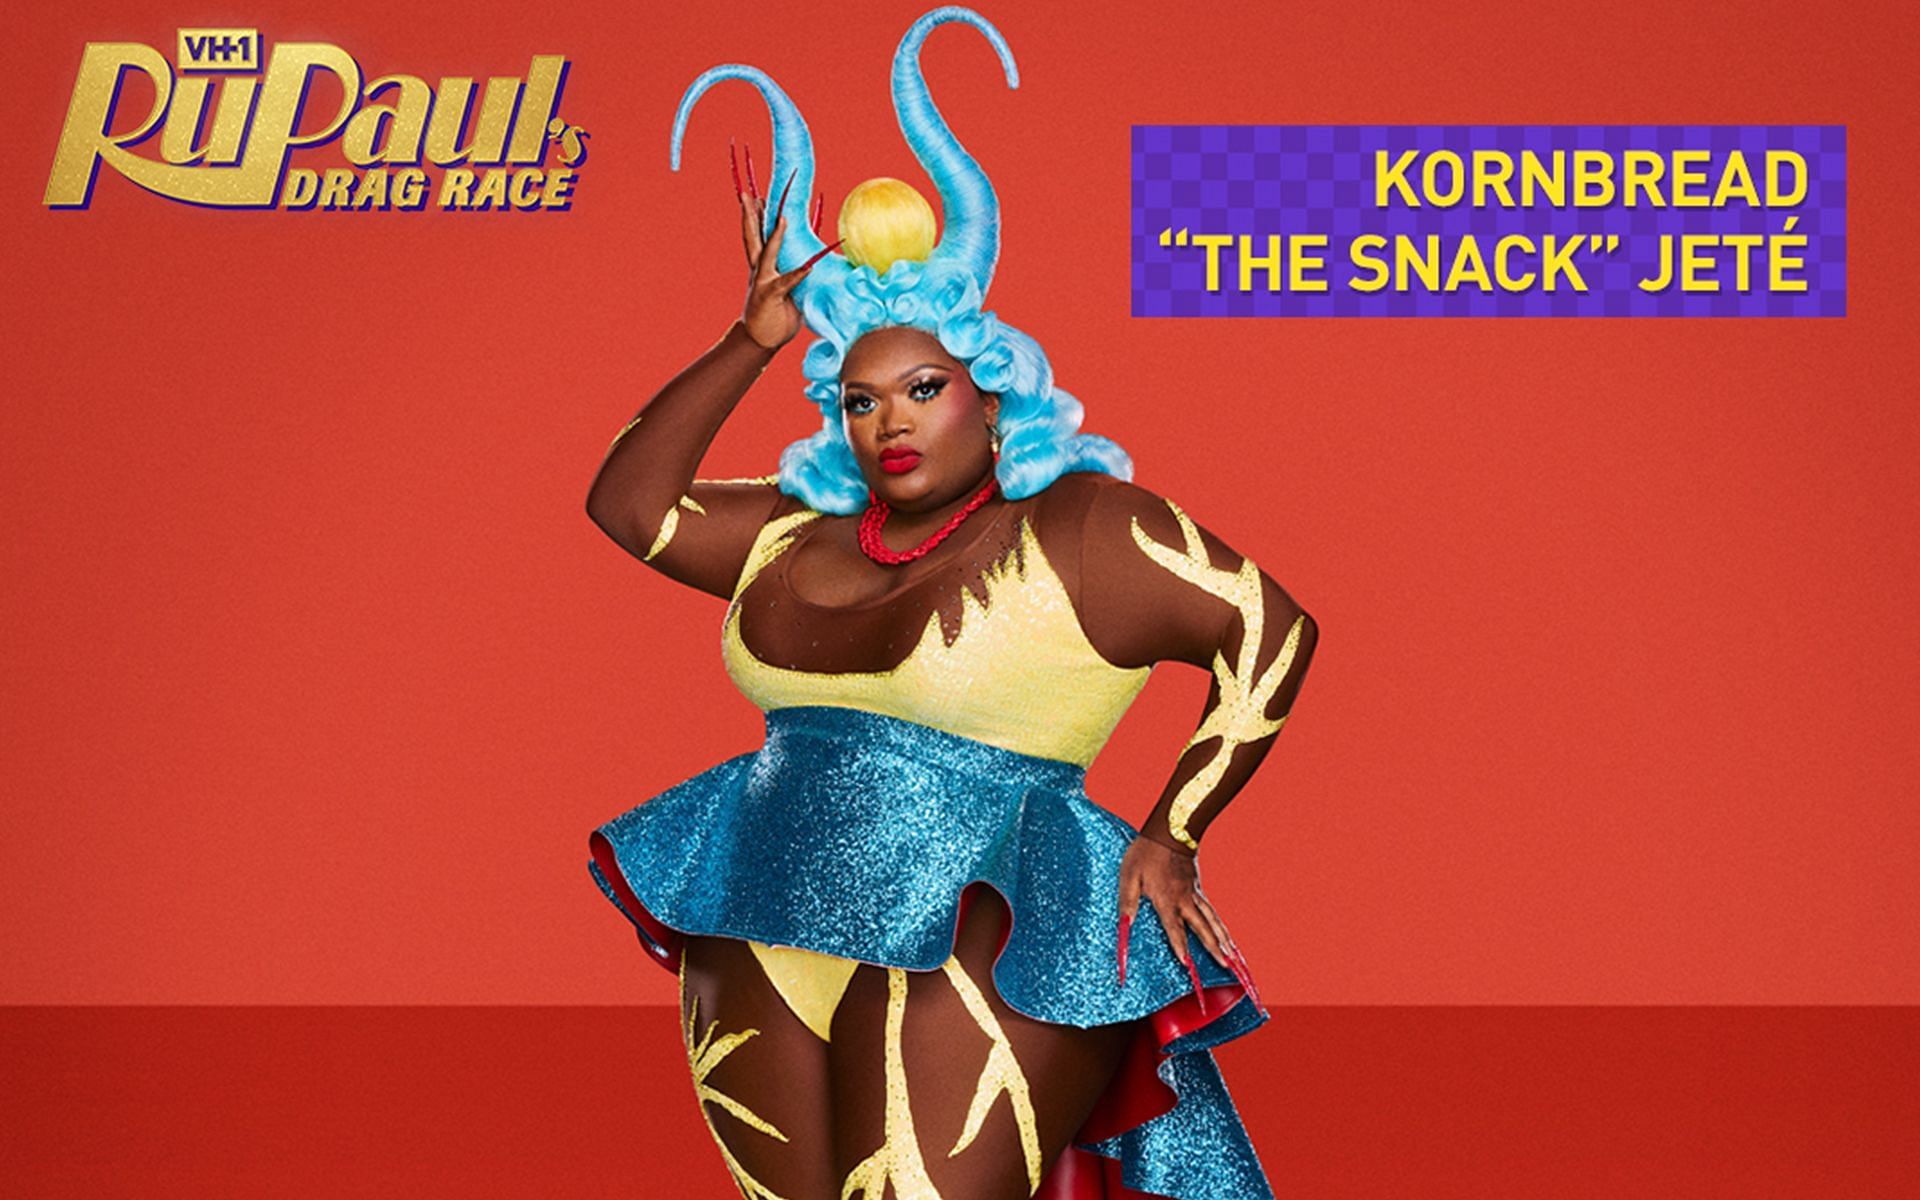 Kornbread &quot;The Snack&quot; Jet&eacute; disqualified from RuPaul&#039;s Drag Race due to ankle injury (Image via Instagram/kornbreadthesnack)